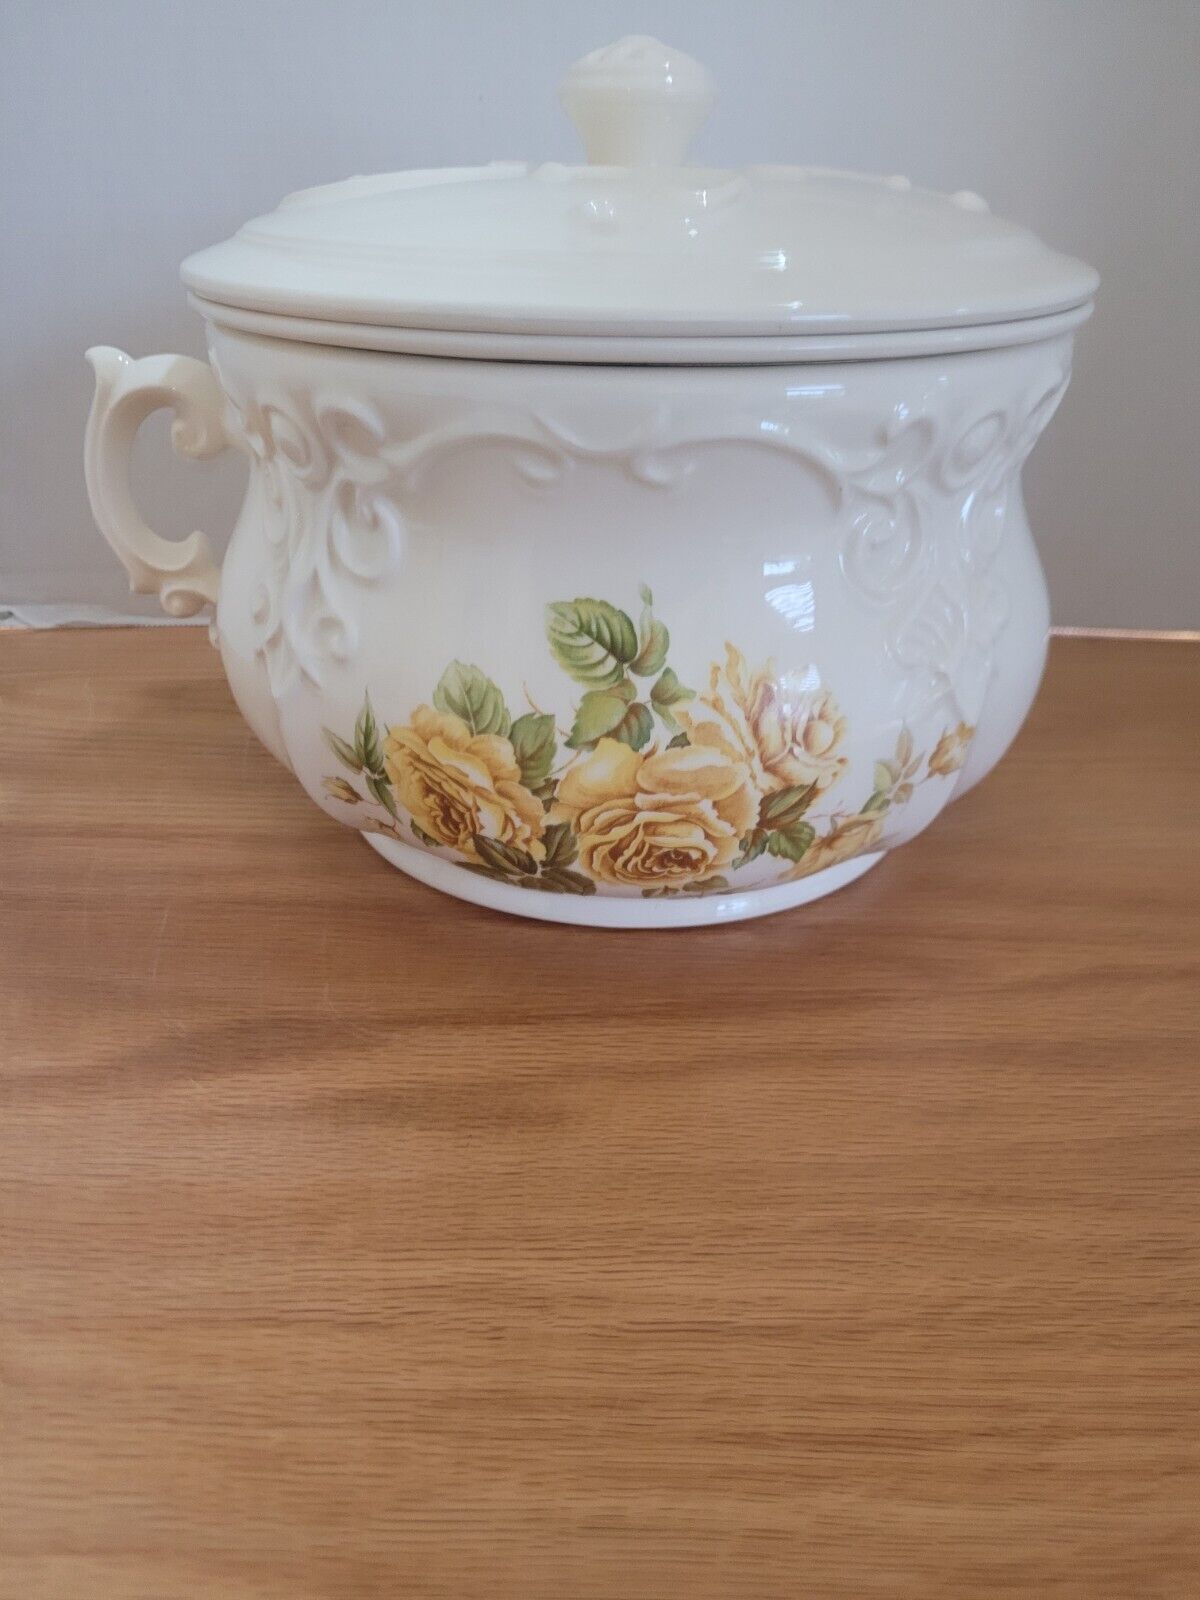 White Arnel’s 3 piece chamber pot. 1976 Yellow Rose Excellent condition 